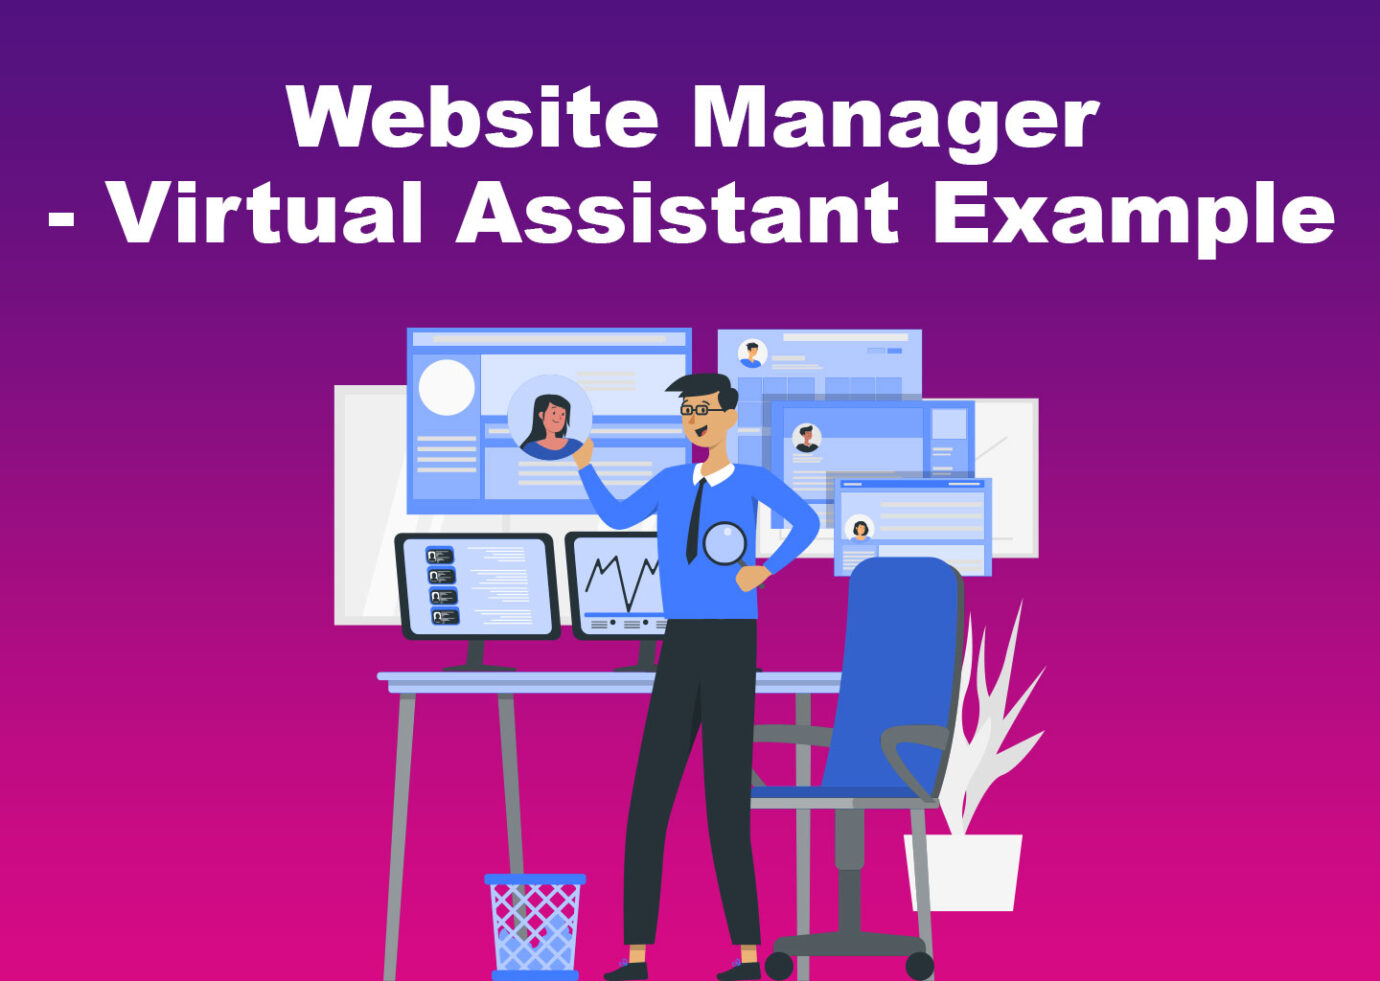 Website Manager - Virtual Assistant Example